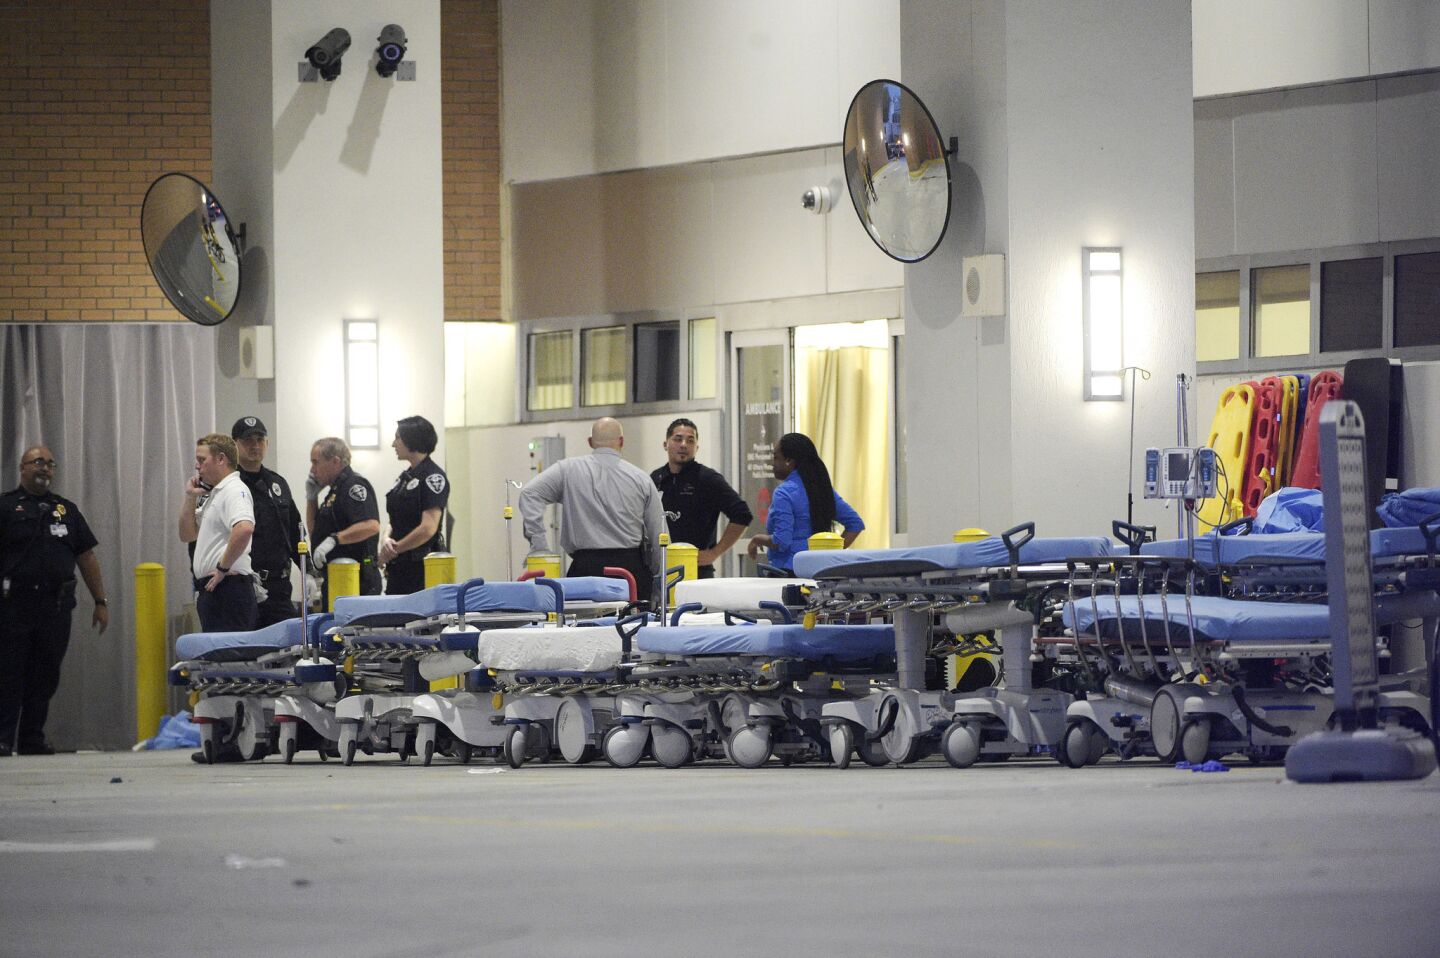 Emergency personnel at Orlando Regional Medical Center wait with stretchers for the arrival of victims from the fatal nightclub shooting.